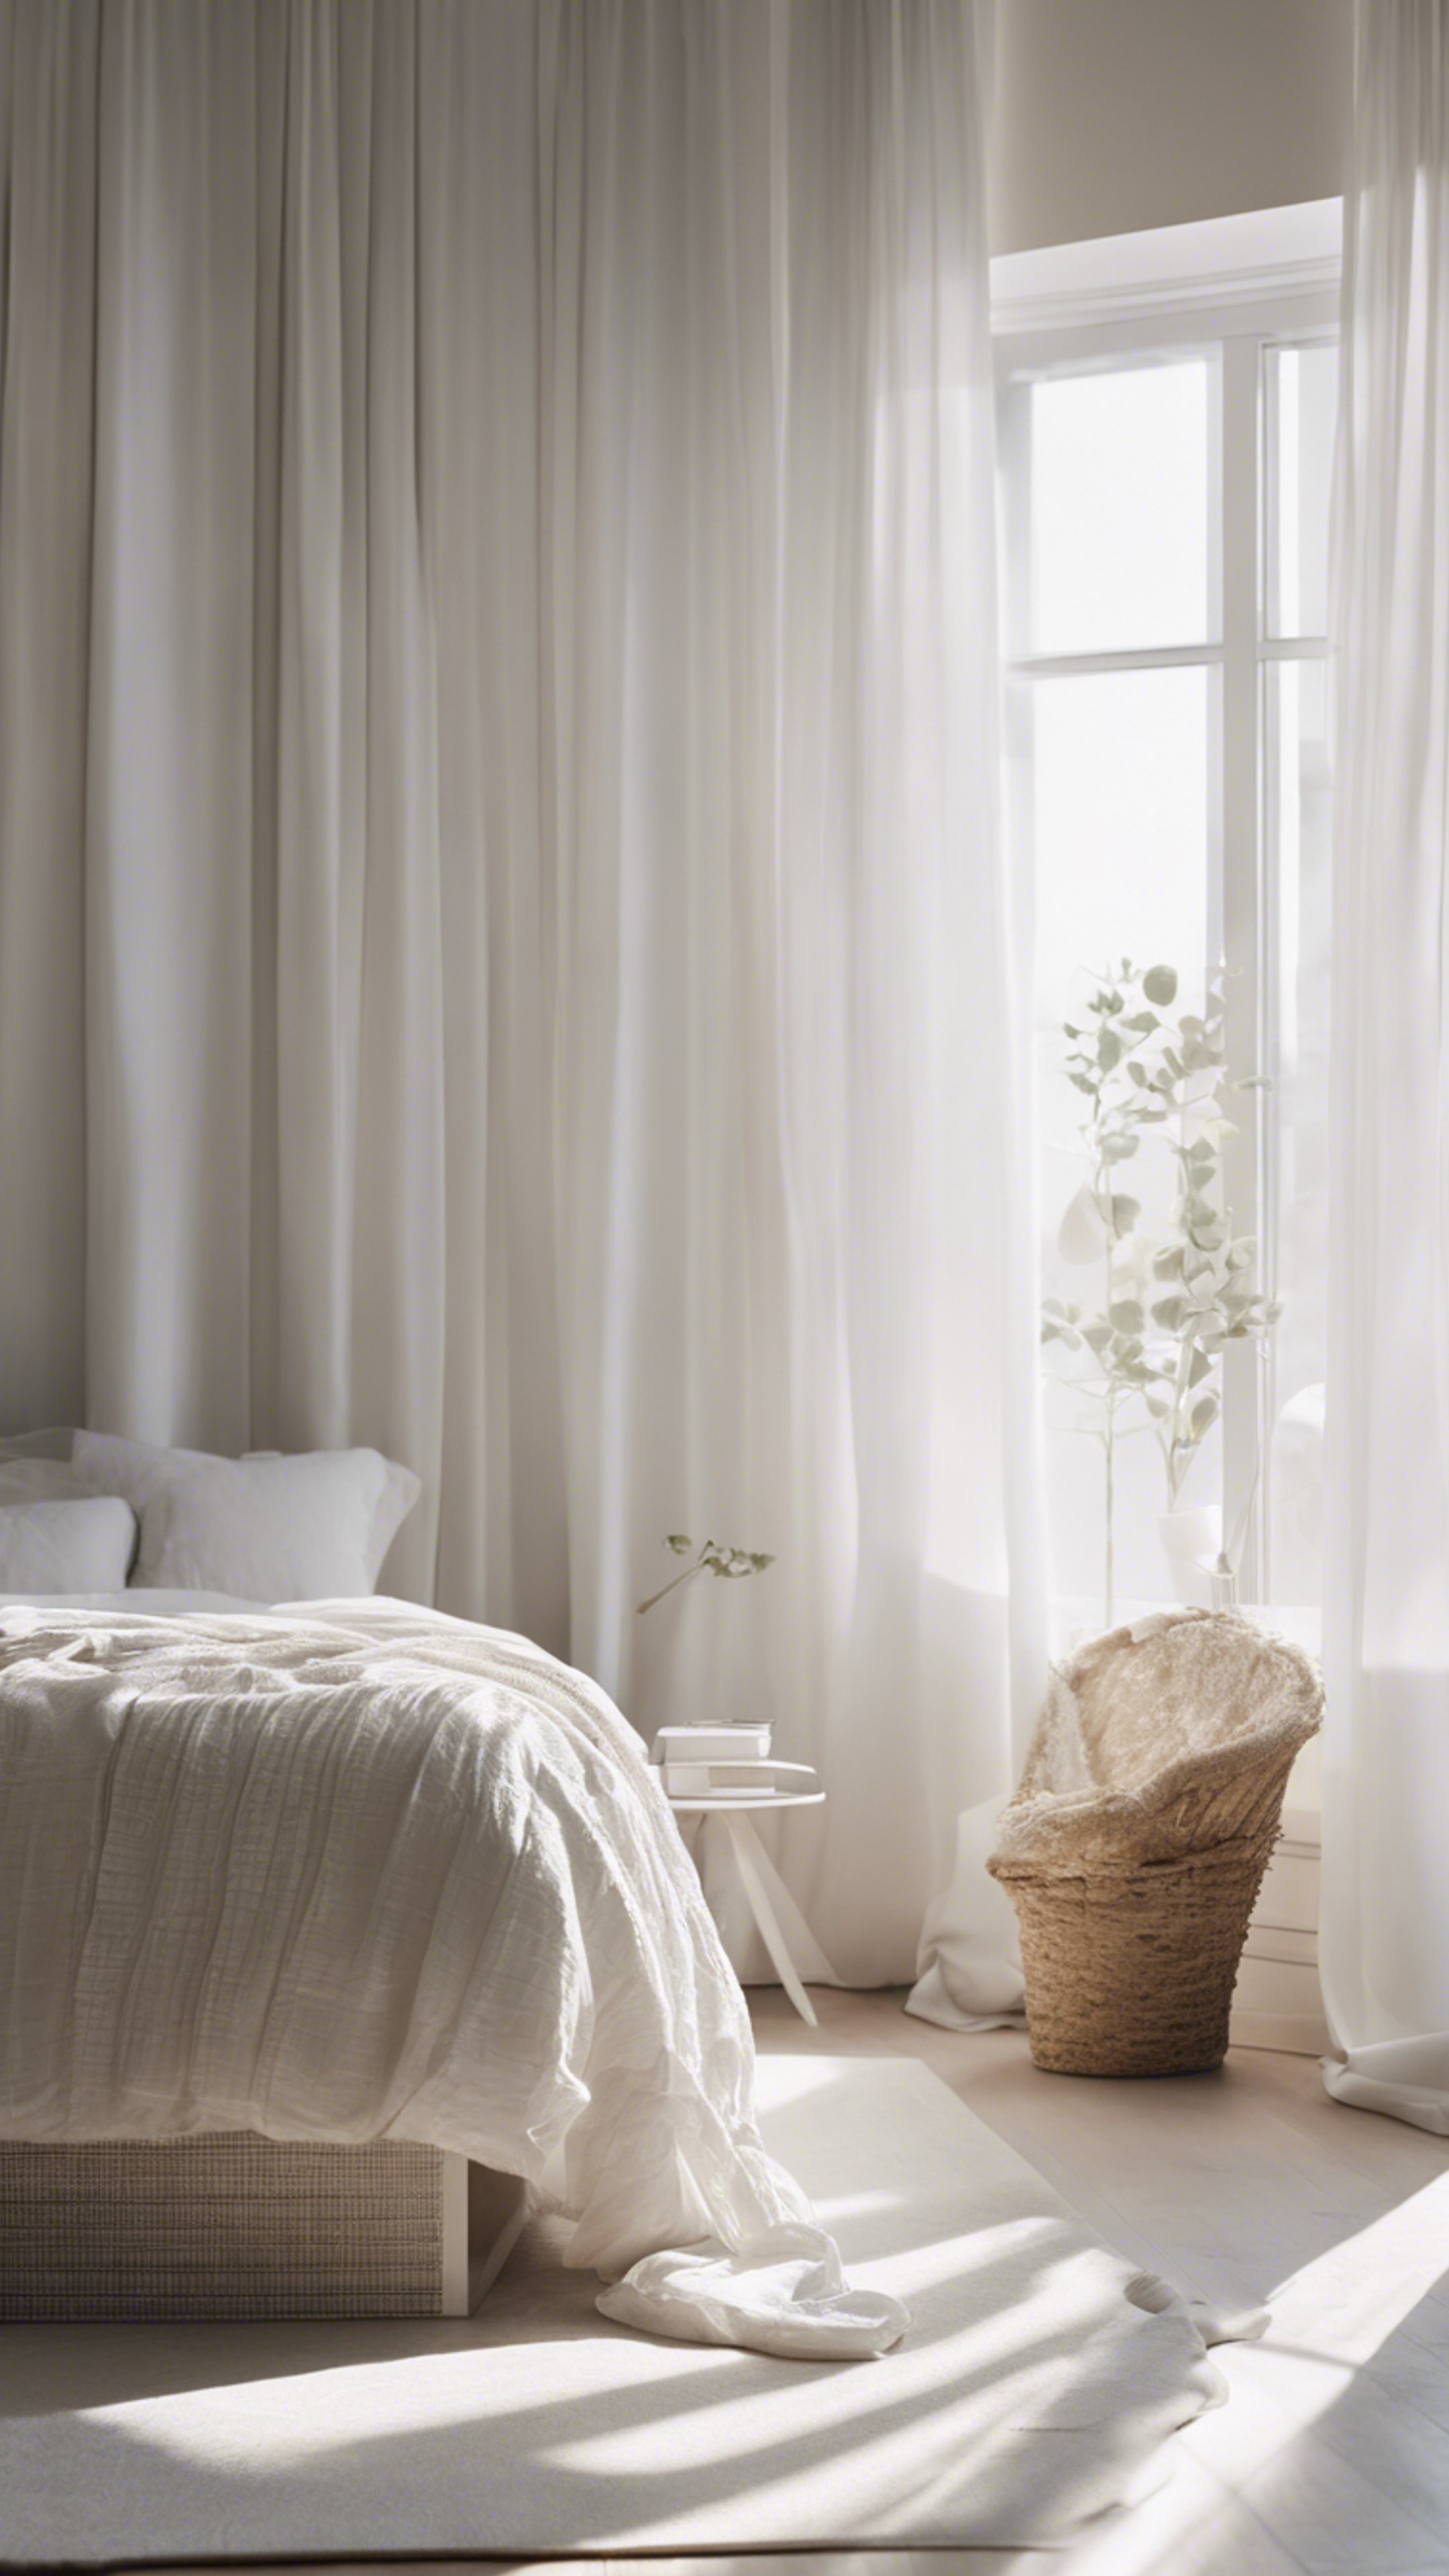 A serene white bedroom with a minimalist aesthetic, sunlight streaming through sheer curtains Шпалери[e50a9fa27884450ea562]